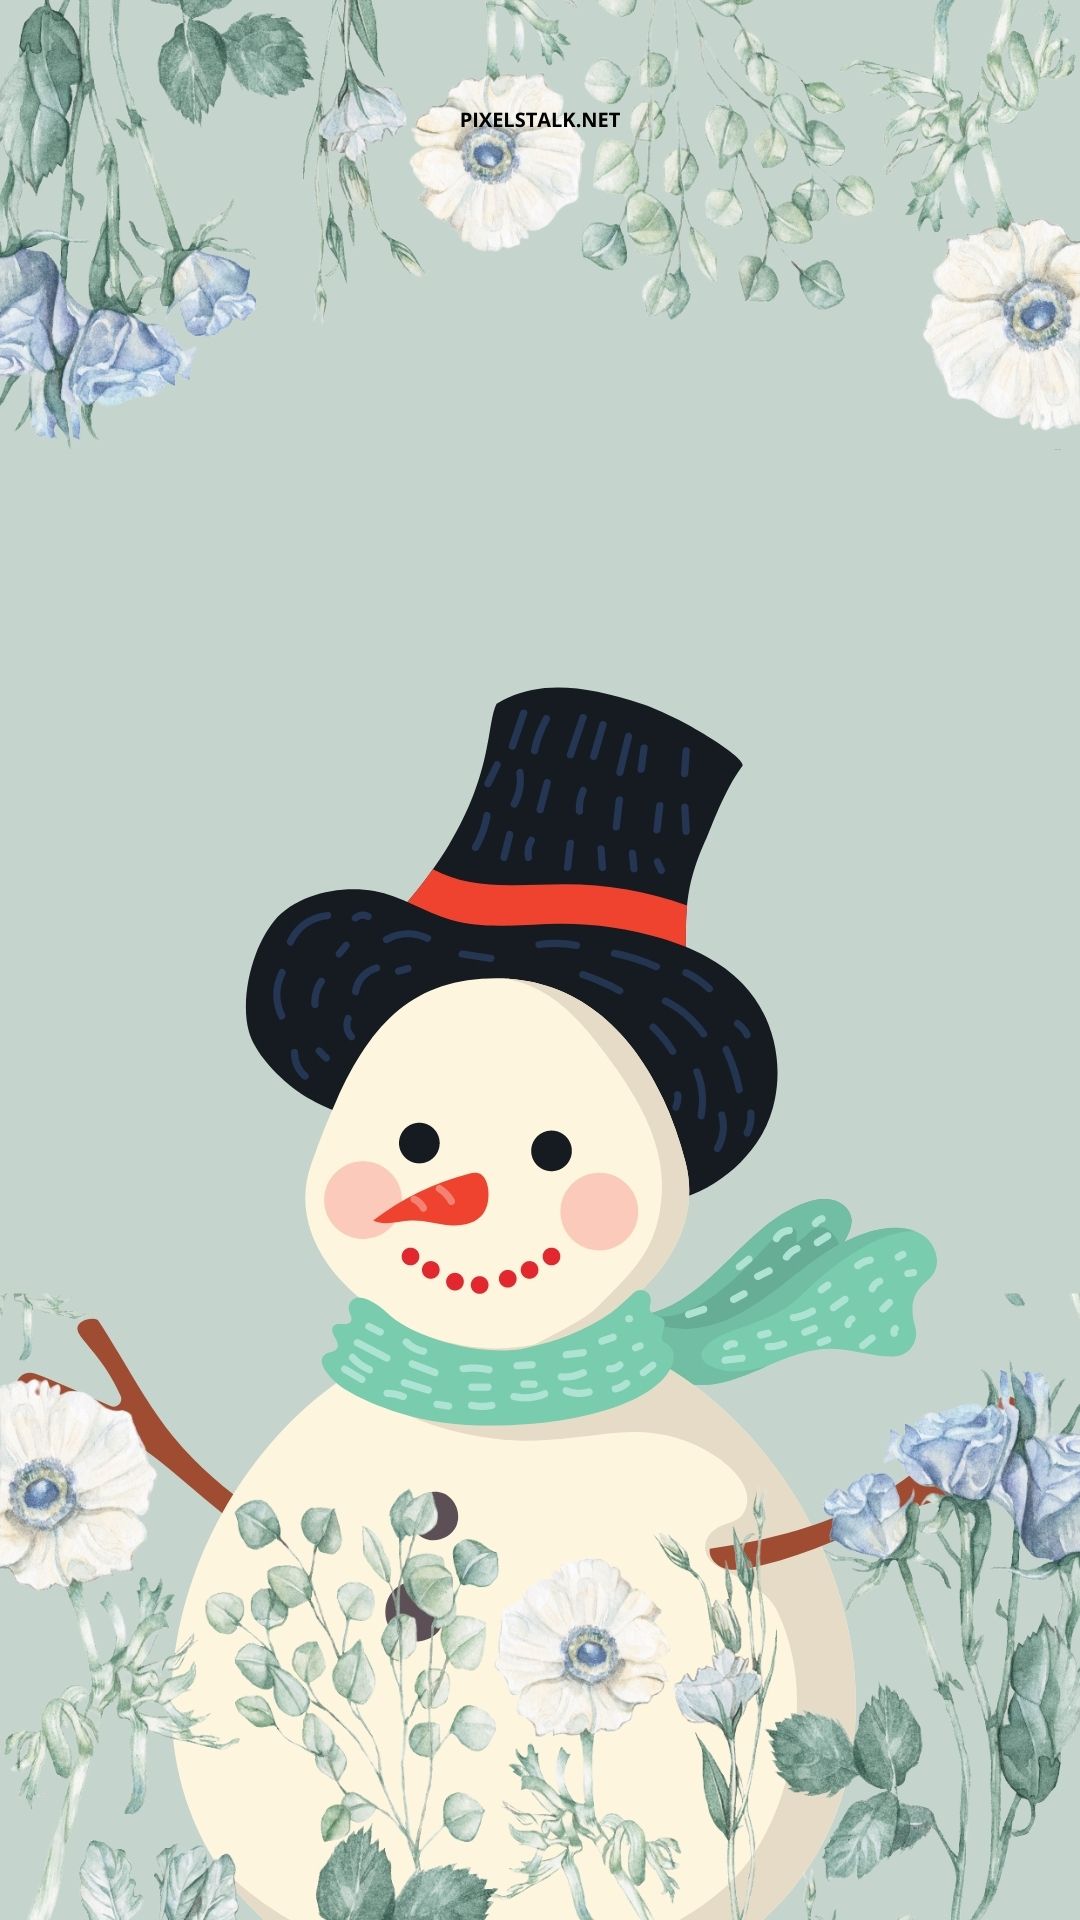 Wallpaper New Year Christmas Snowman Snow Winter Background  Download  Free Image